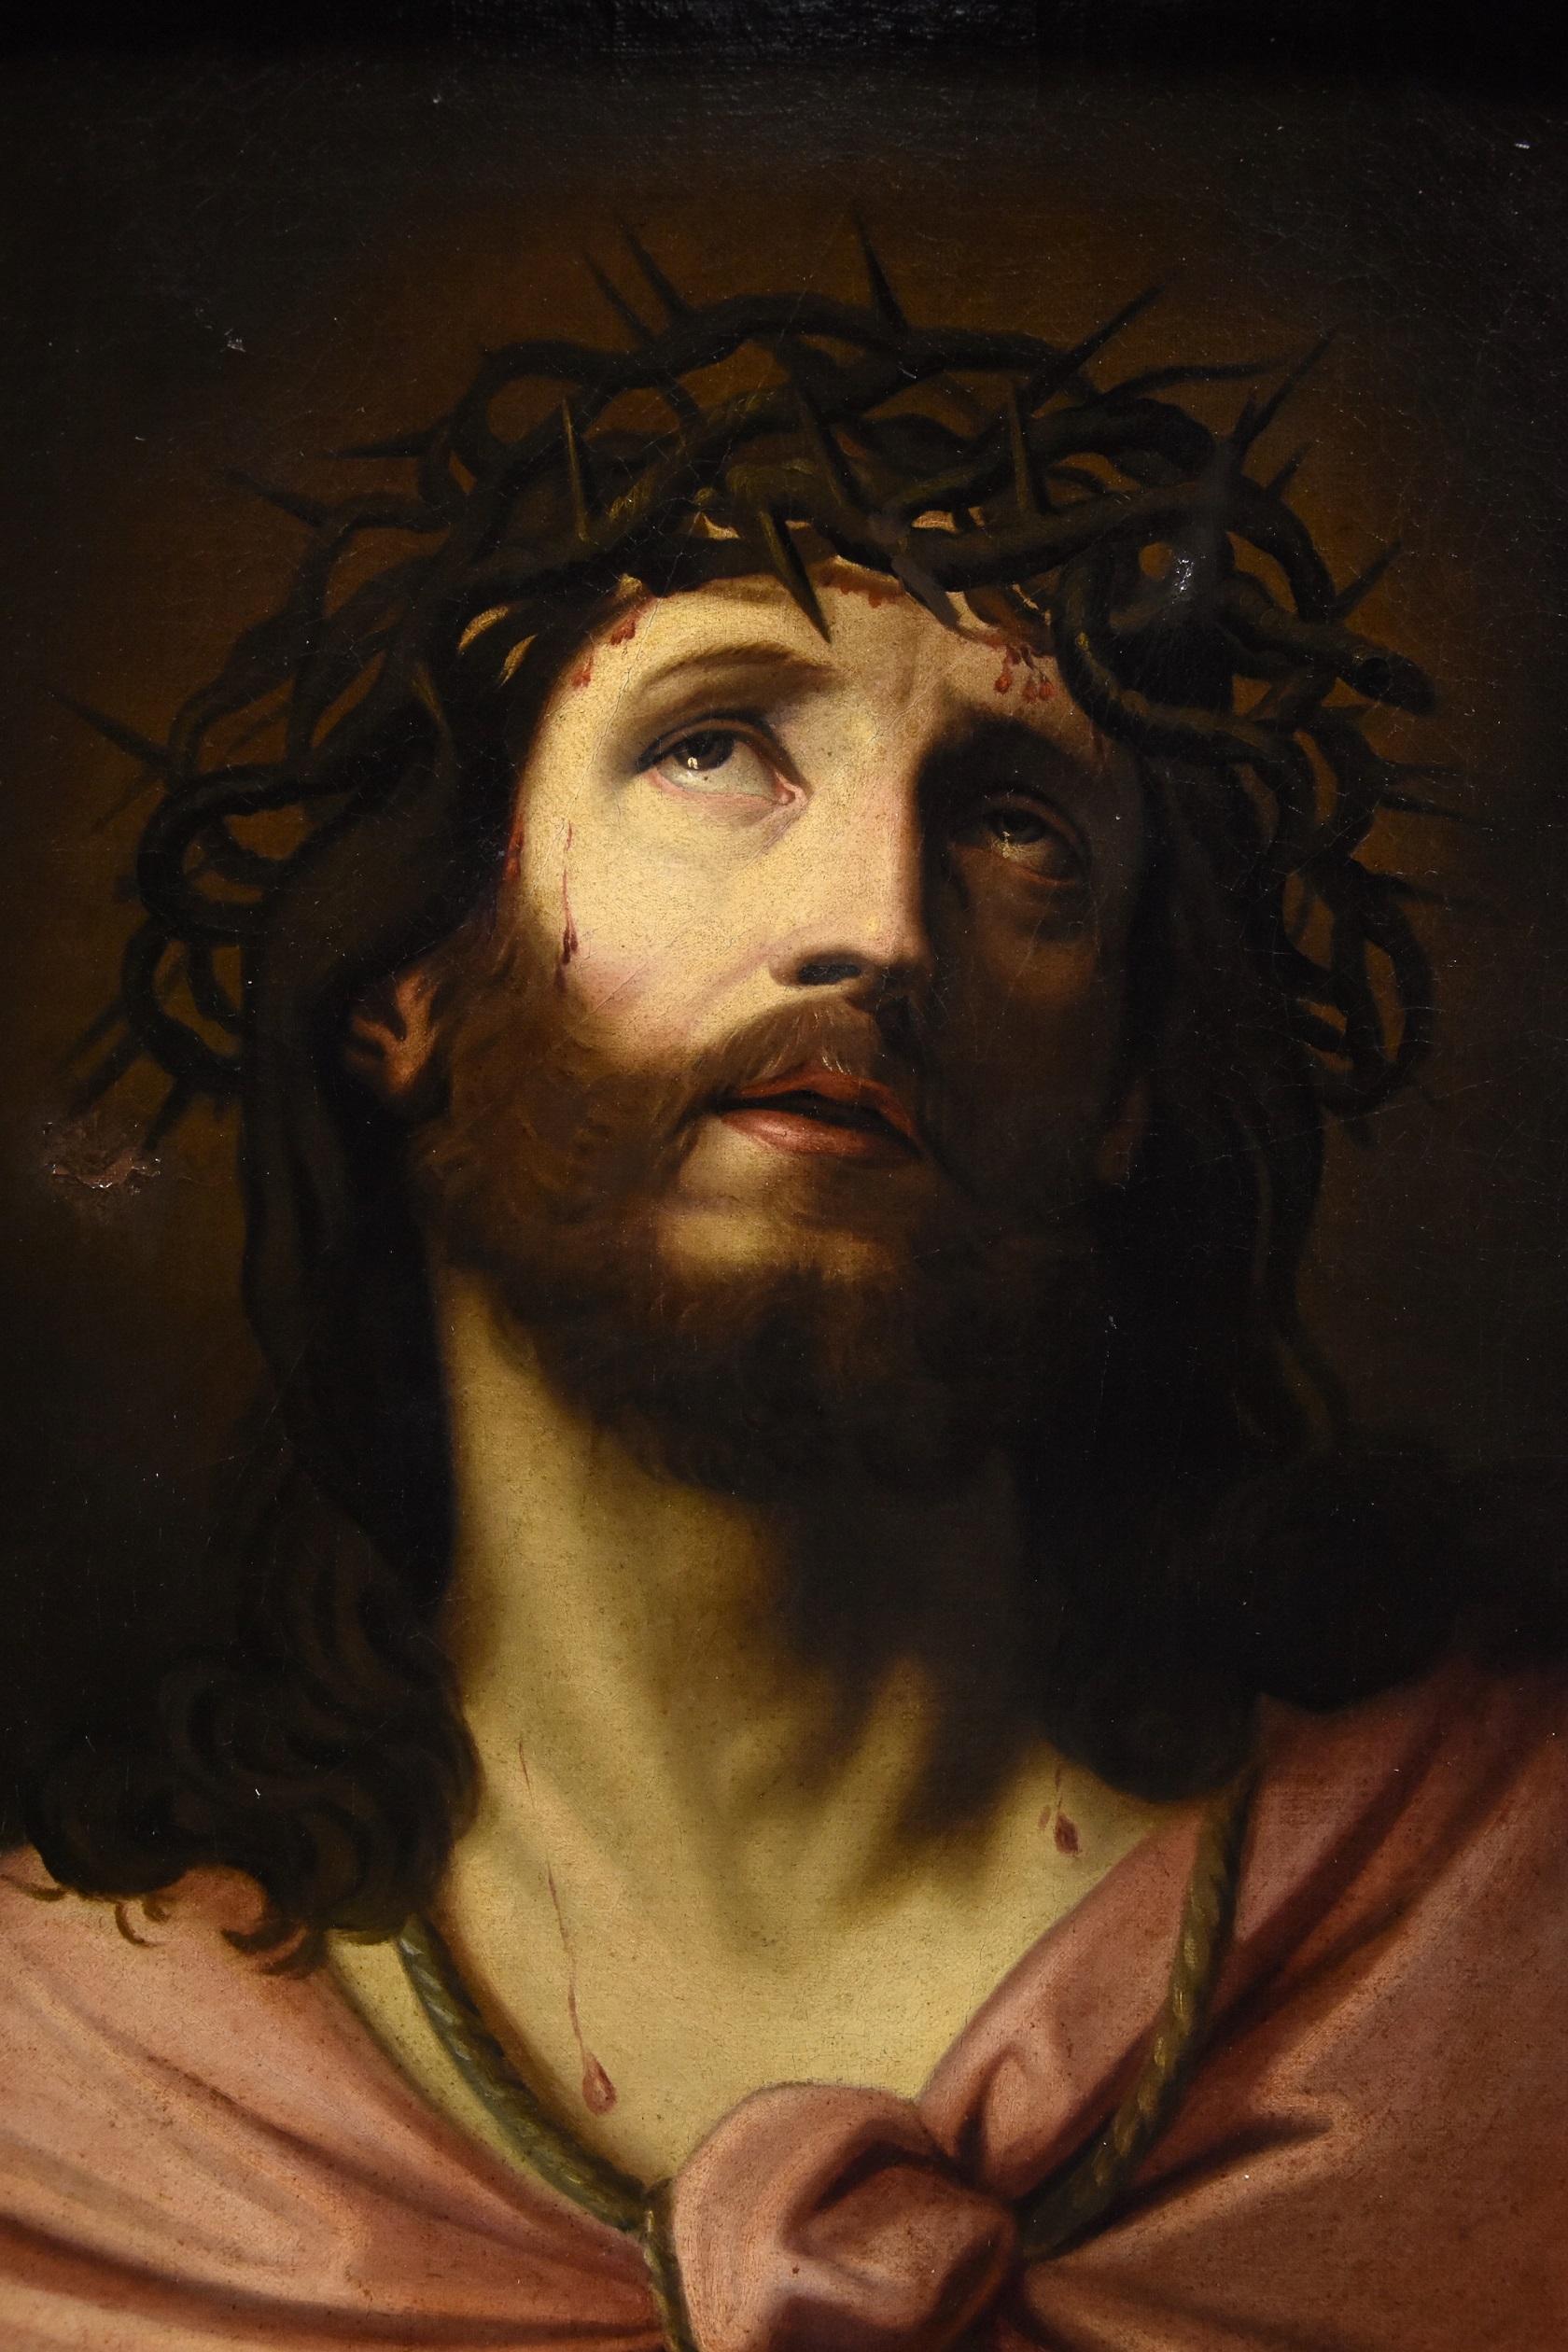 Francesco Trevisani (Capodistria 1656 - Rome 1746) Attributable
Ecce Homo

oil on canvas
60 x 50 cm. - In frame 79 x 69 cm.

The proposed work, depicting the intense image of Christ crowned with thorns, picks up on the iconography of Ecce homo